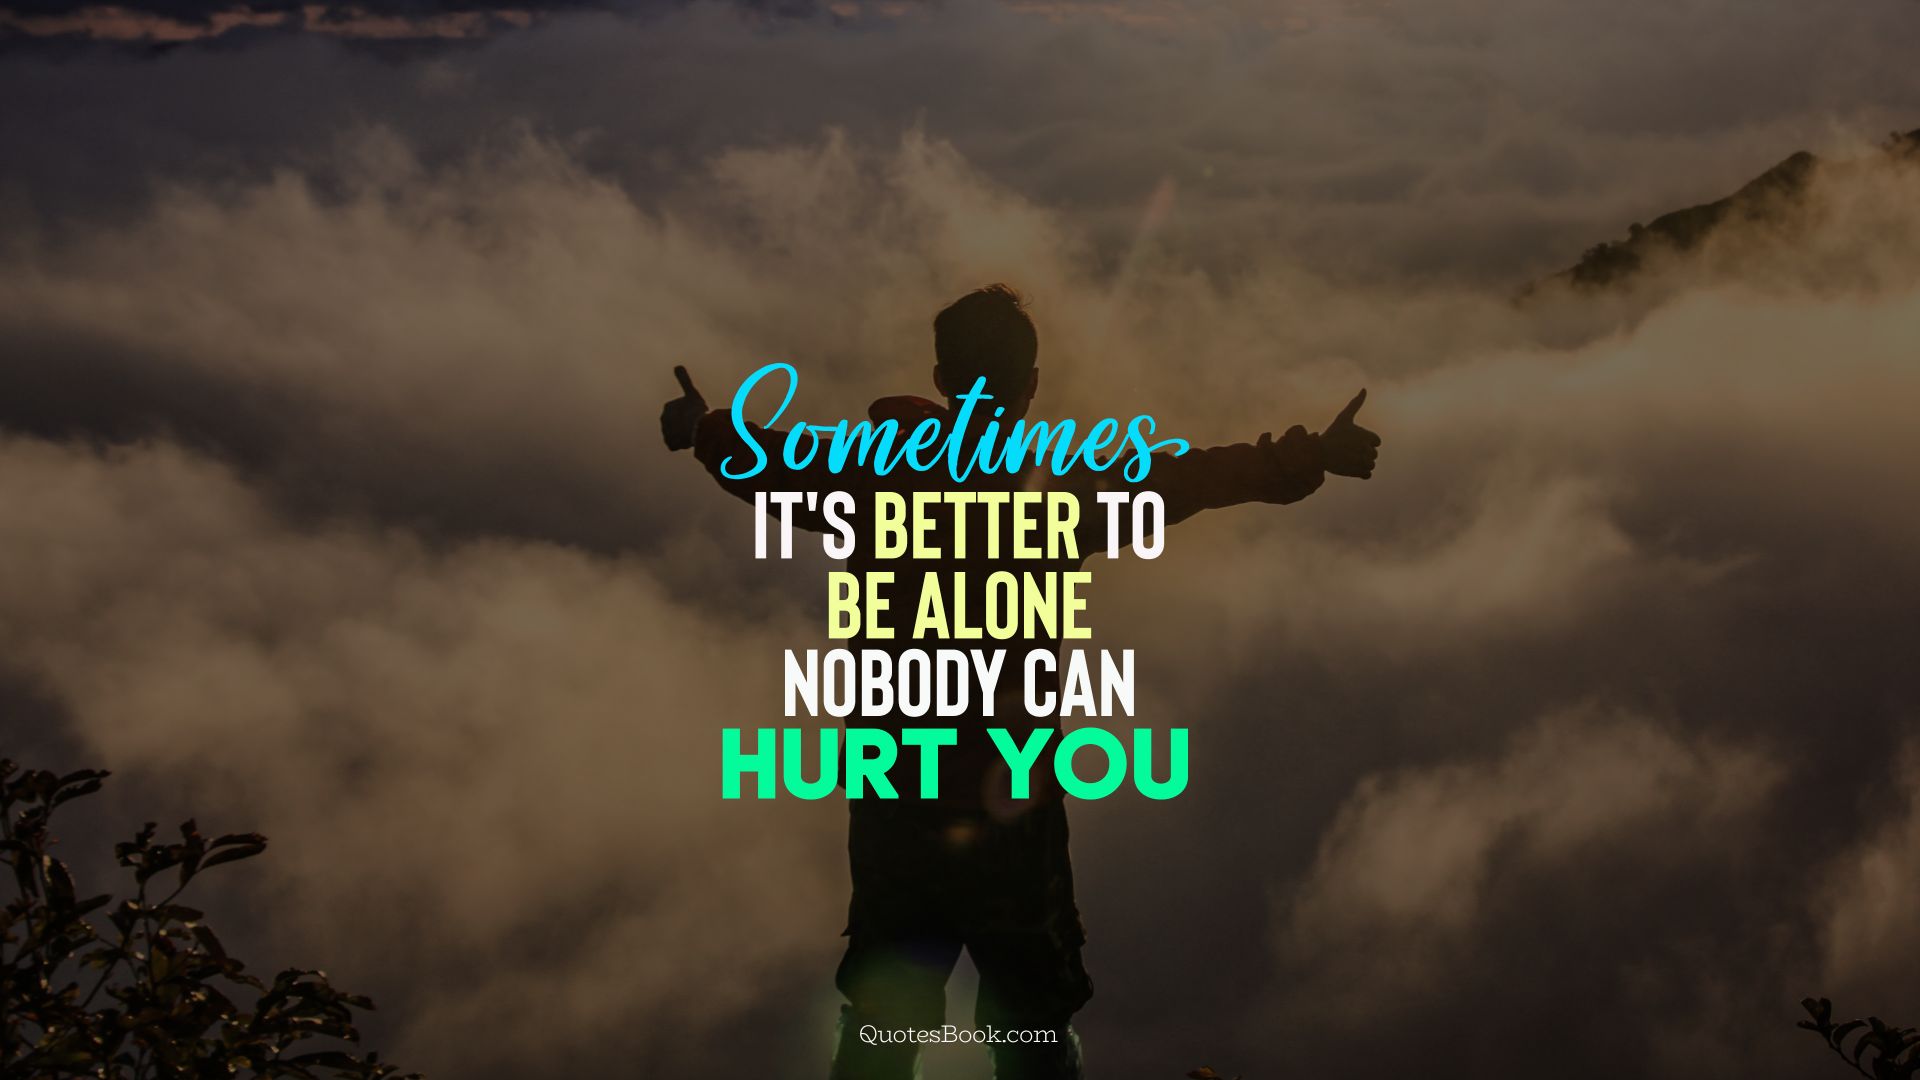 Sometimes it's better to be alone nobody can hurt you